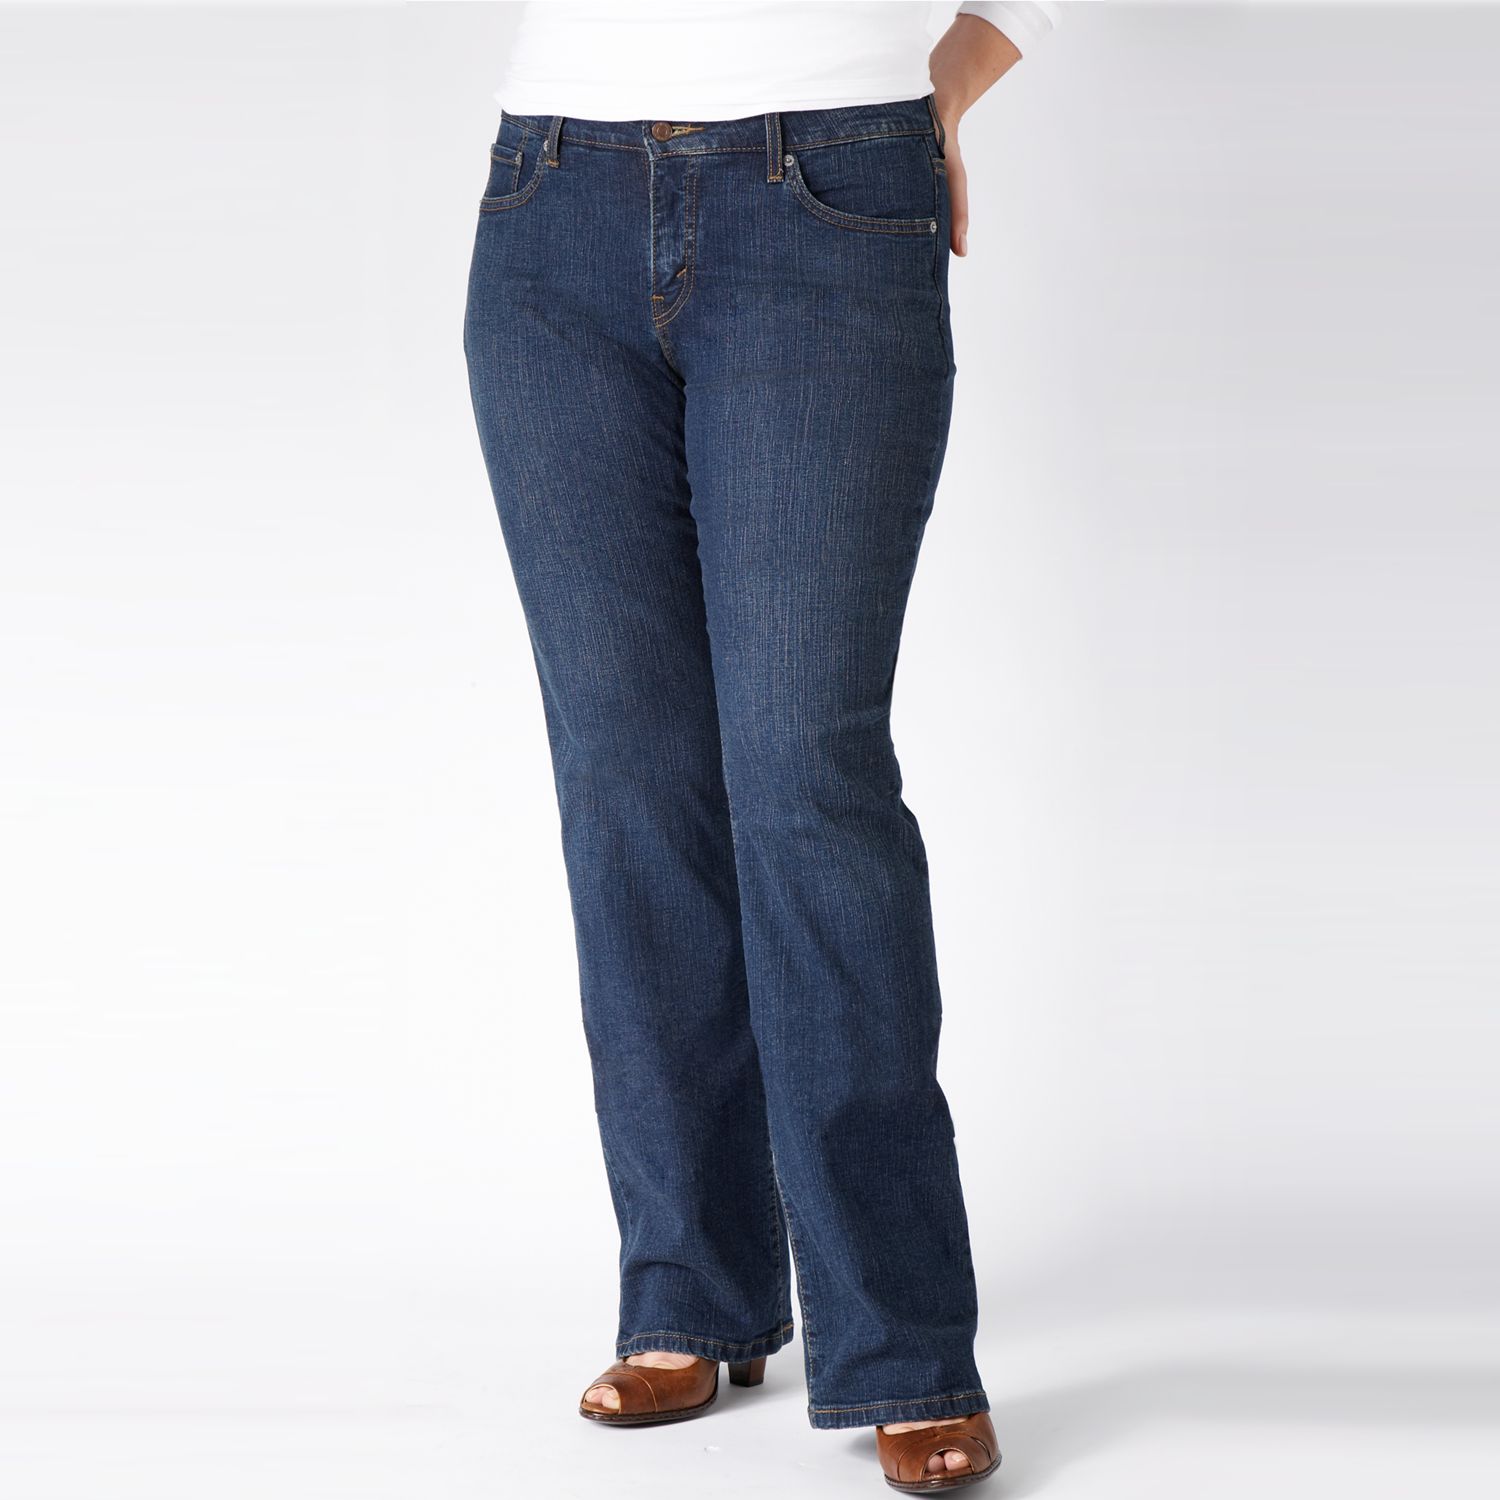 levi's perfectly slimming jeans